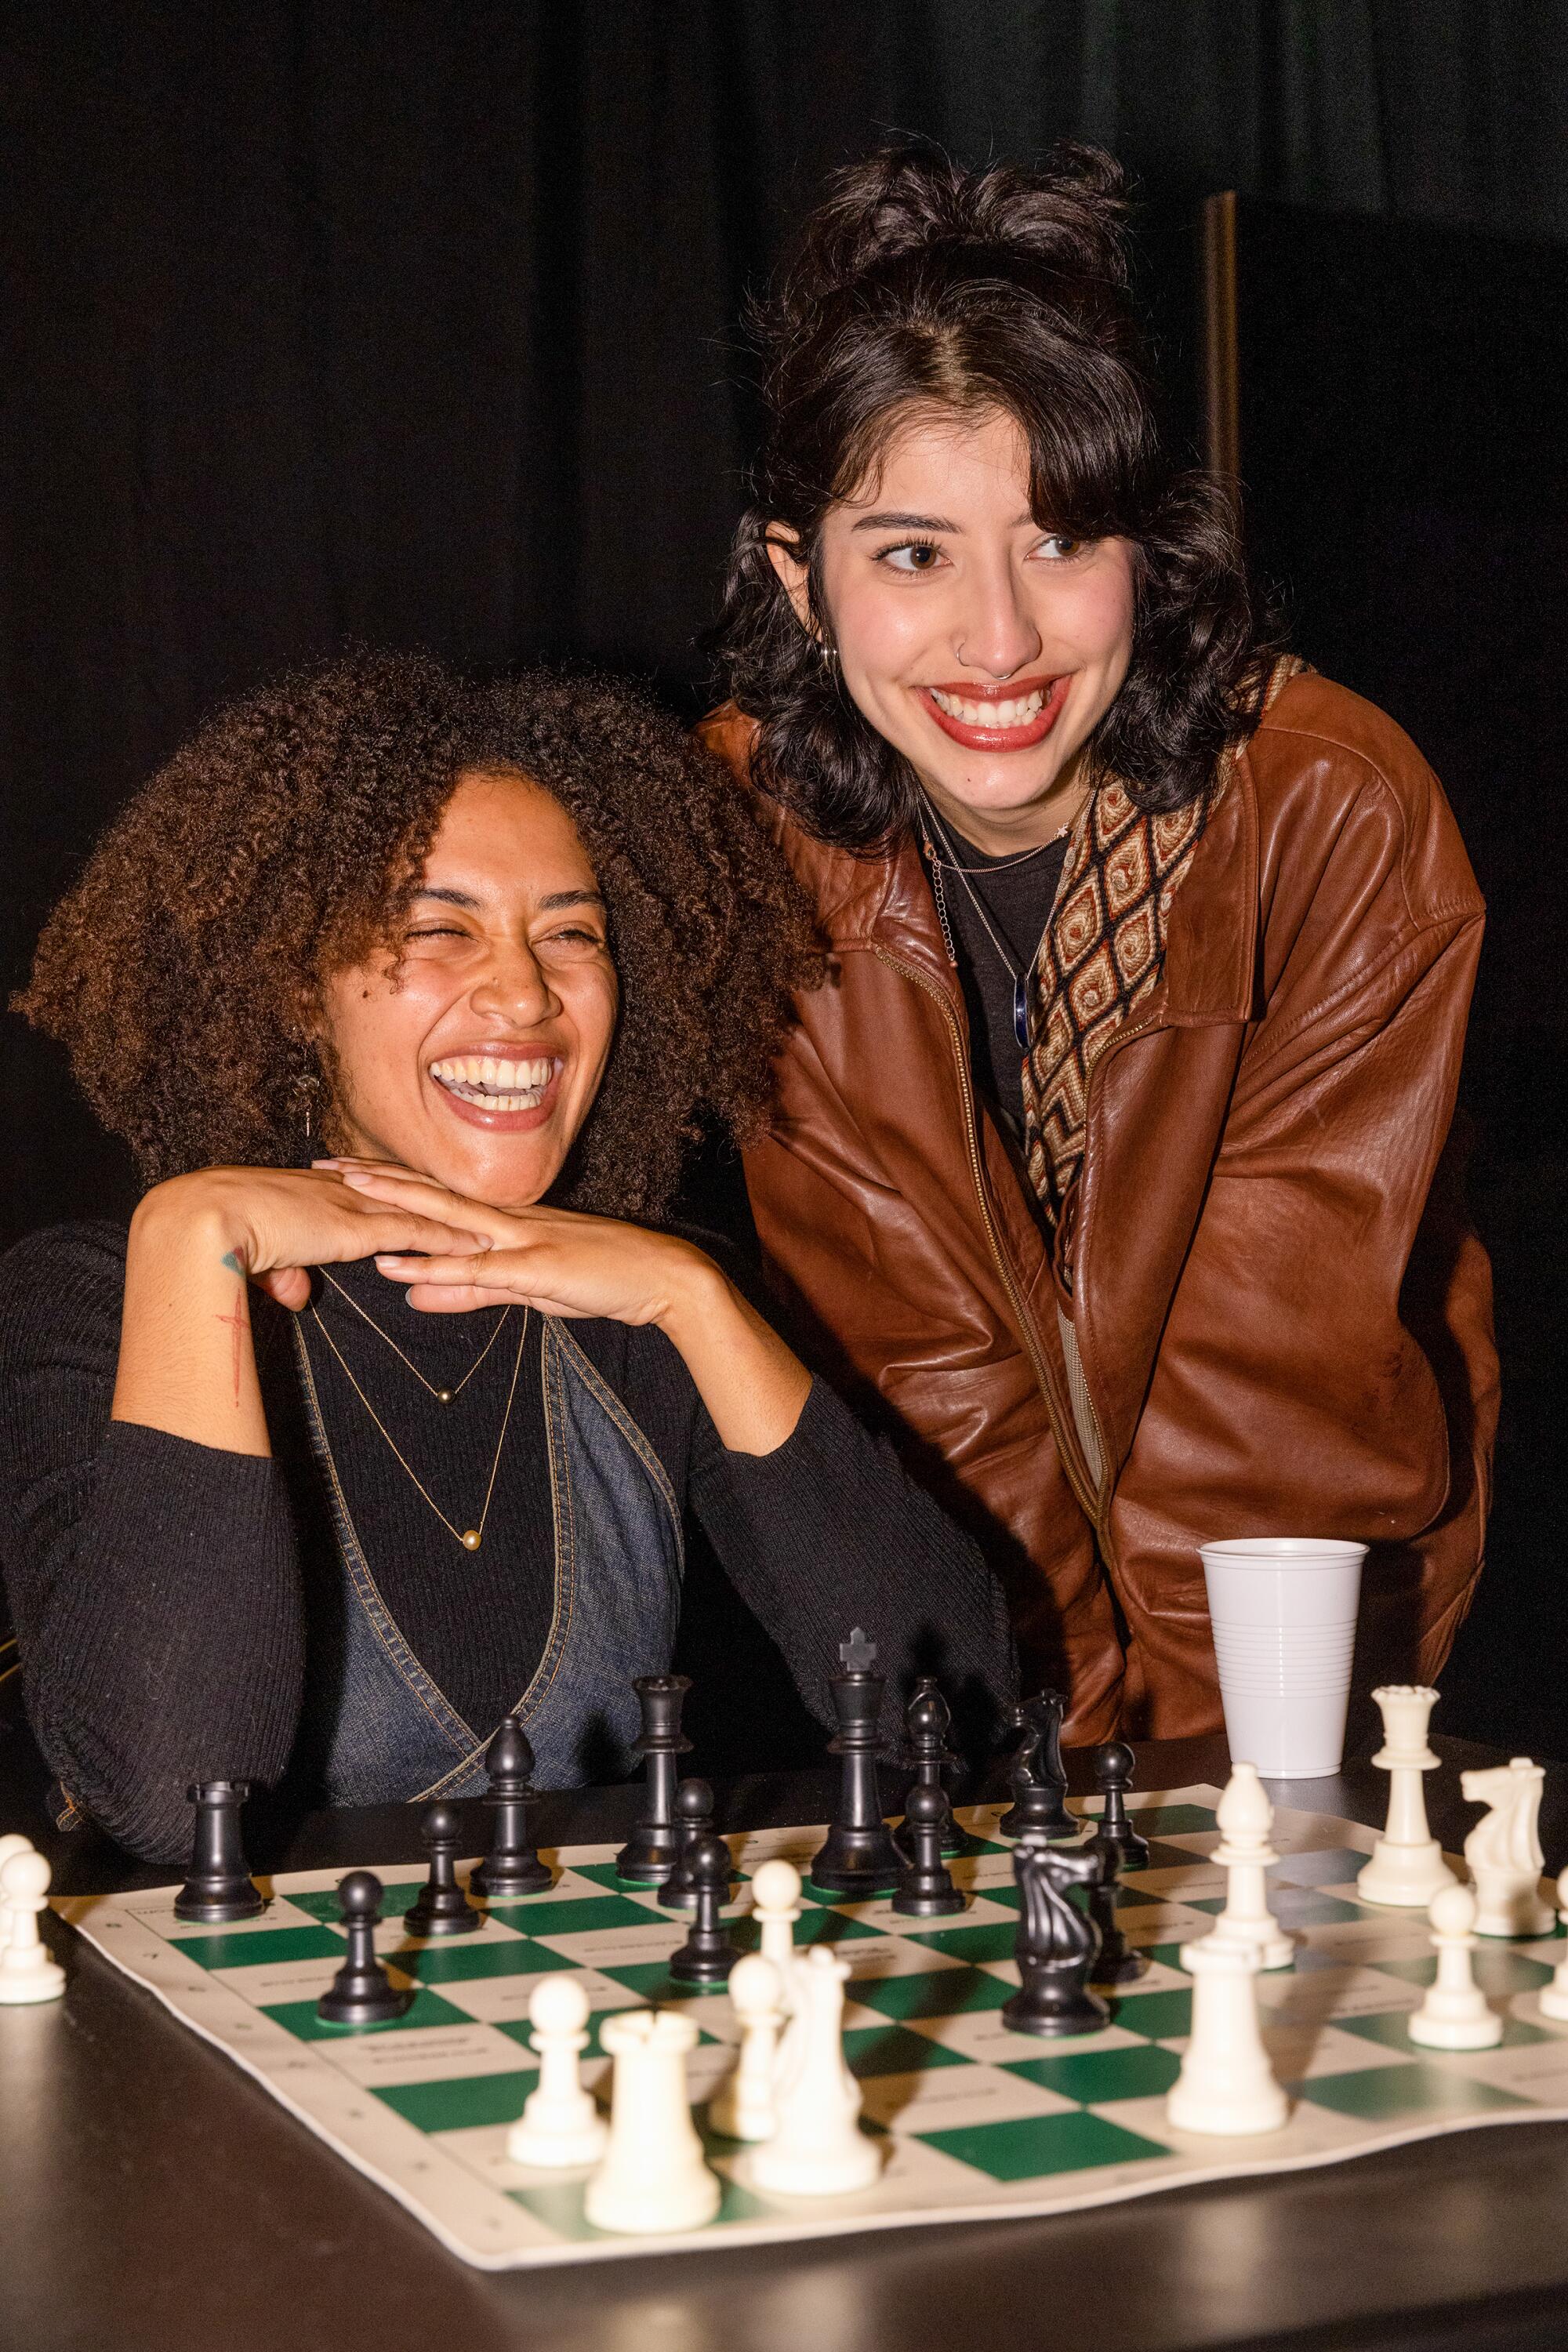 Two women, one seated, one standing, smile at the unseen person they're facing over a chess board